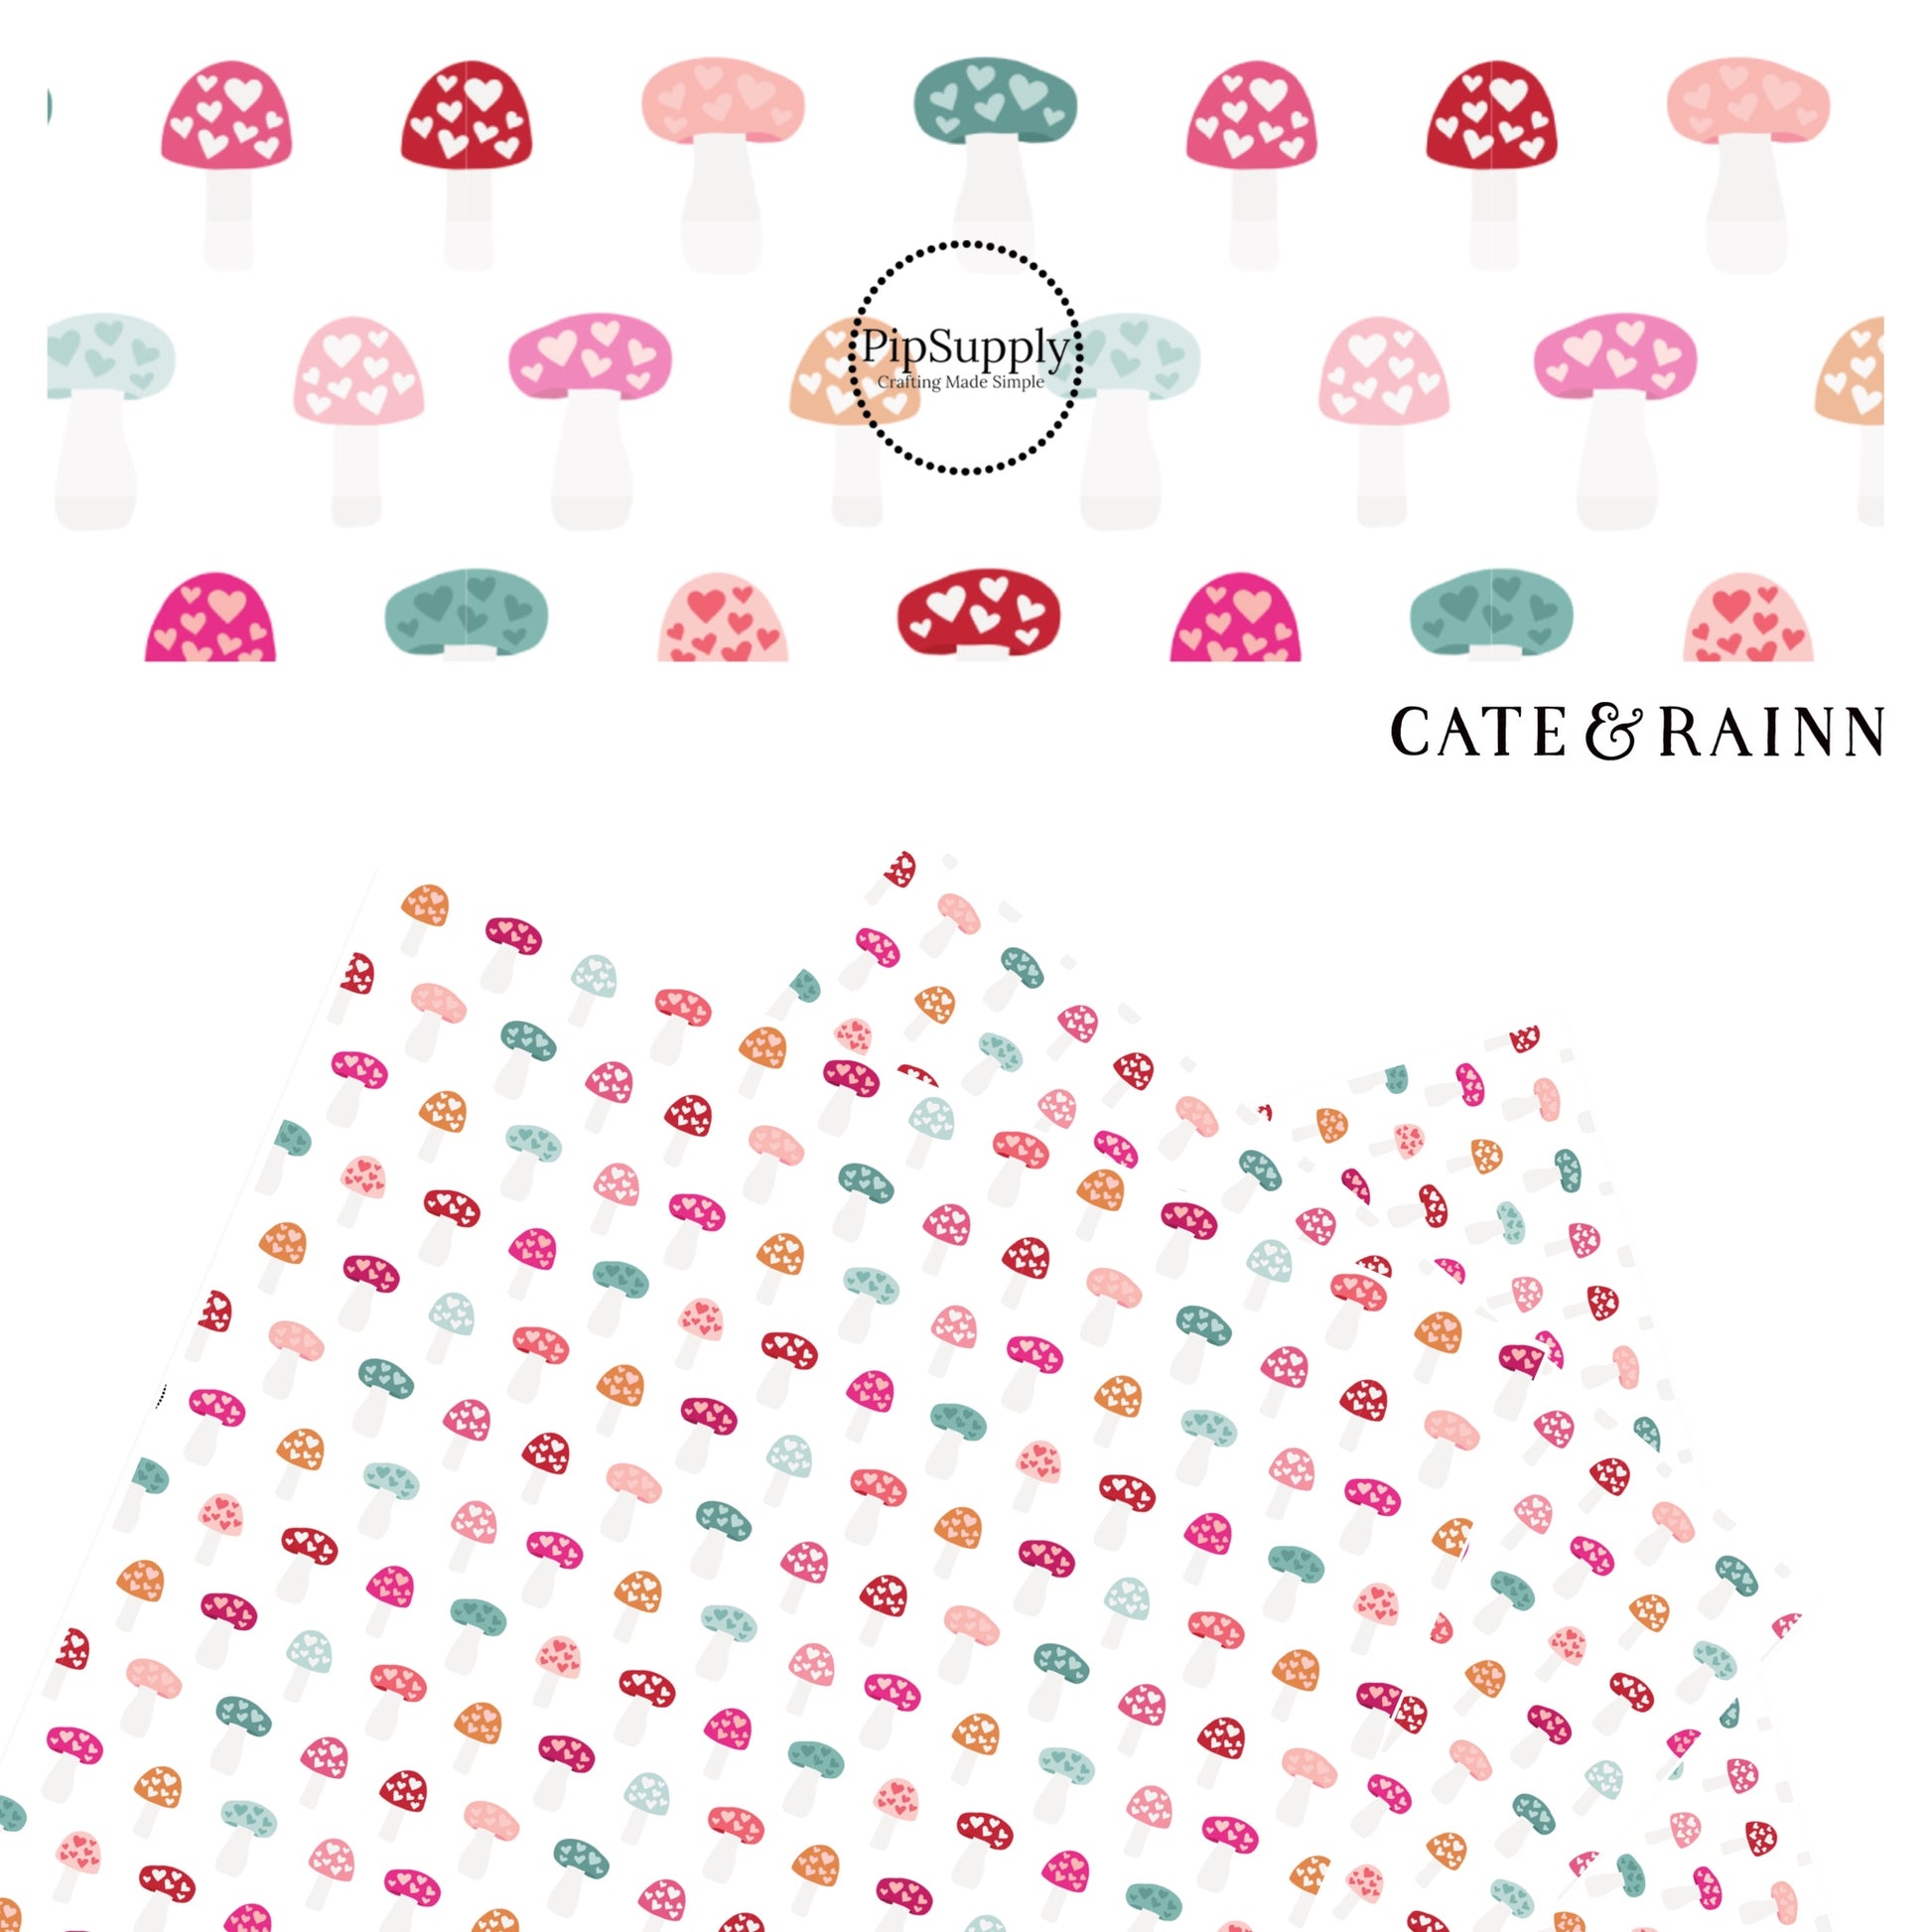 Hot pink, teal, orange, and pink mushrooms with hearts on white faux leather sheets